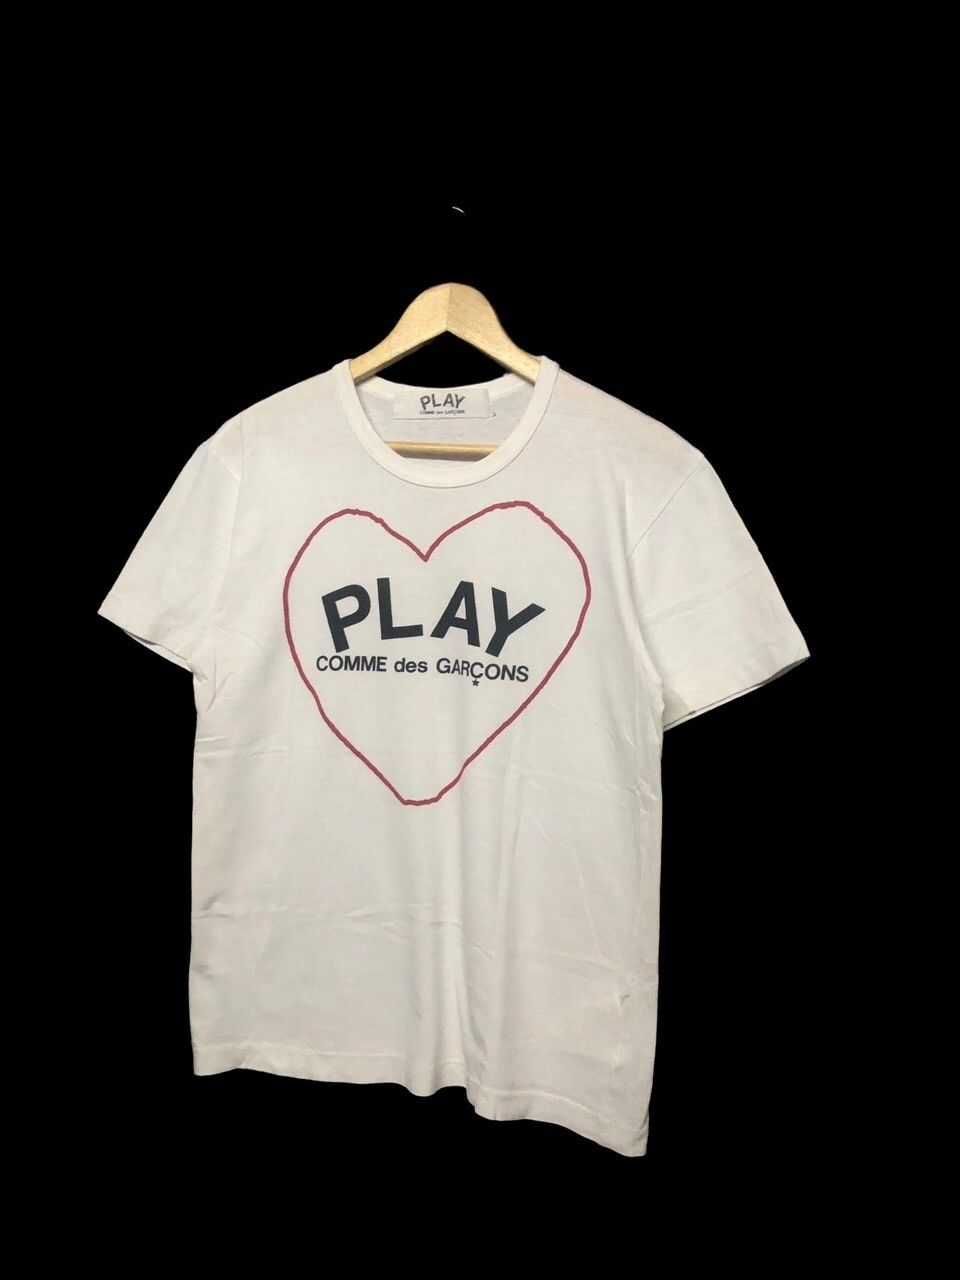 AD2005 Comme Des Garcons Play Tee - 4